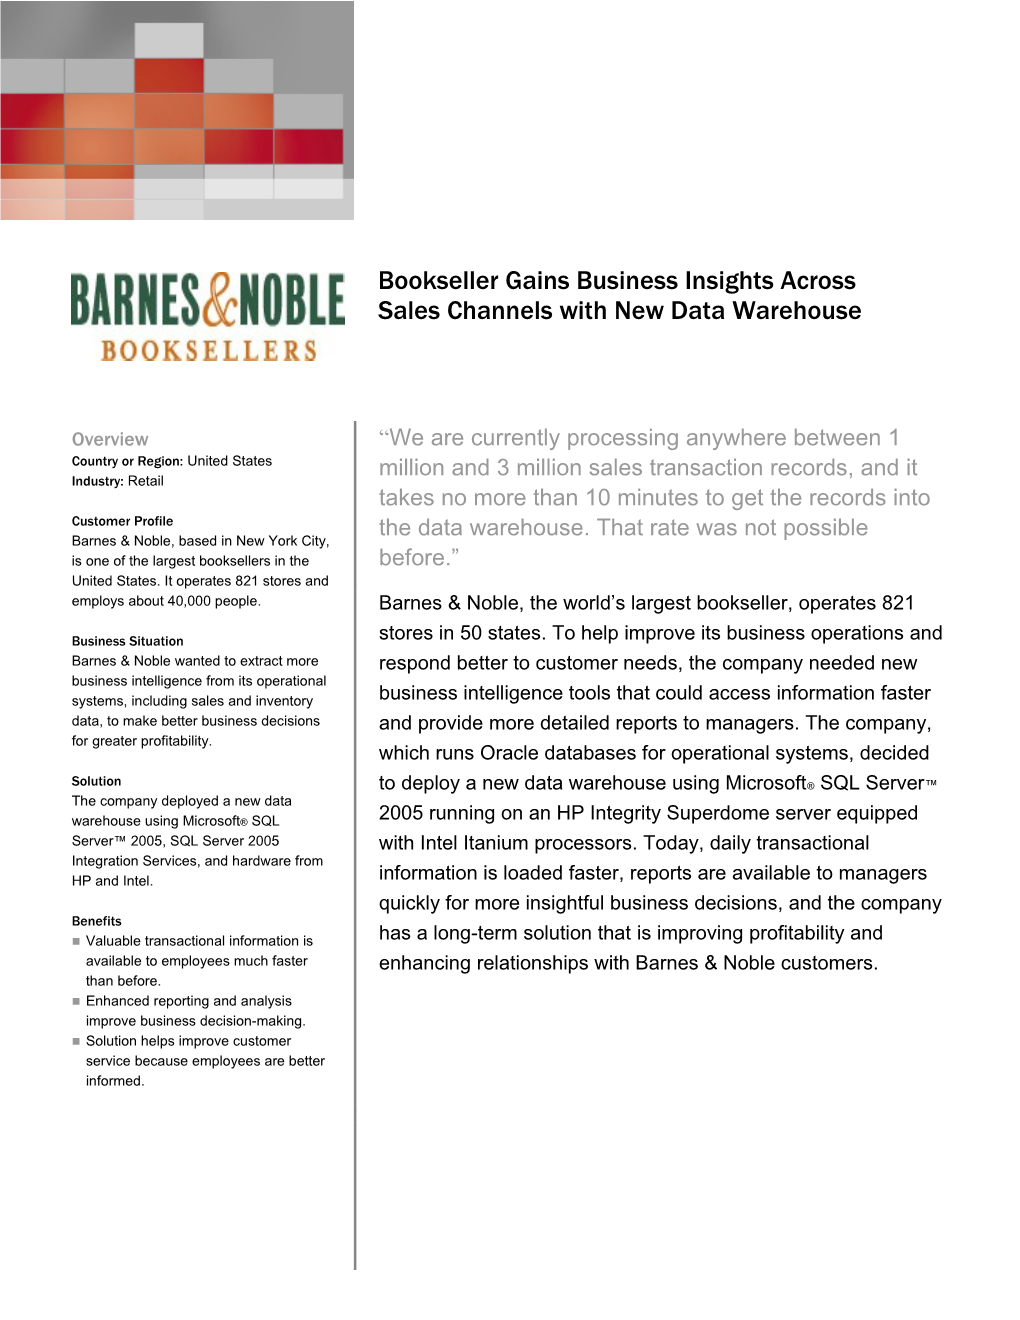 Bookseller Gains Business Insights Across Sales Channels with New Data Warehouse